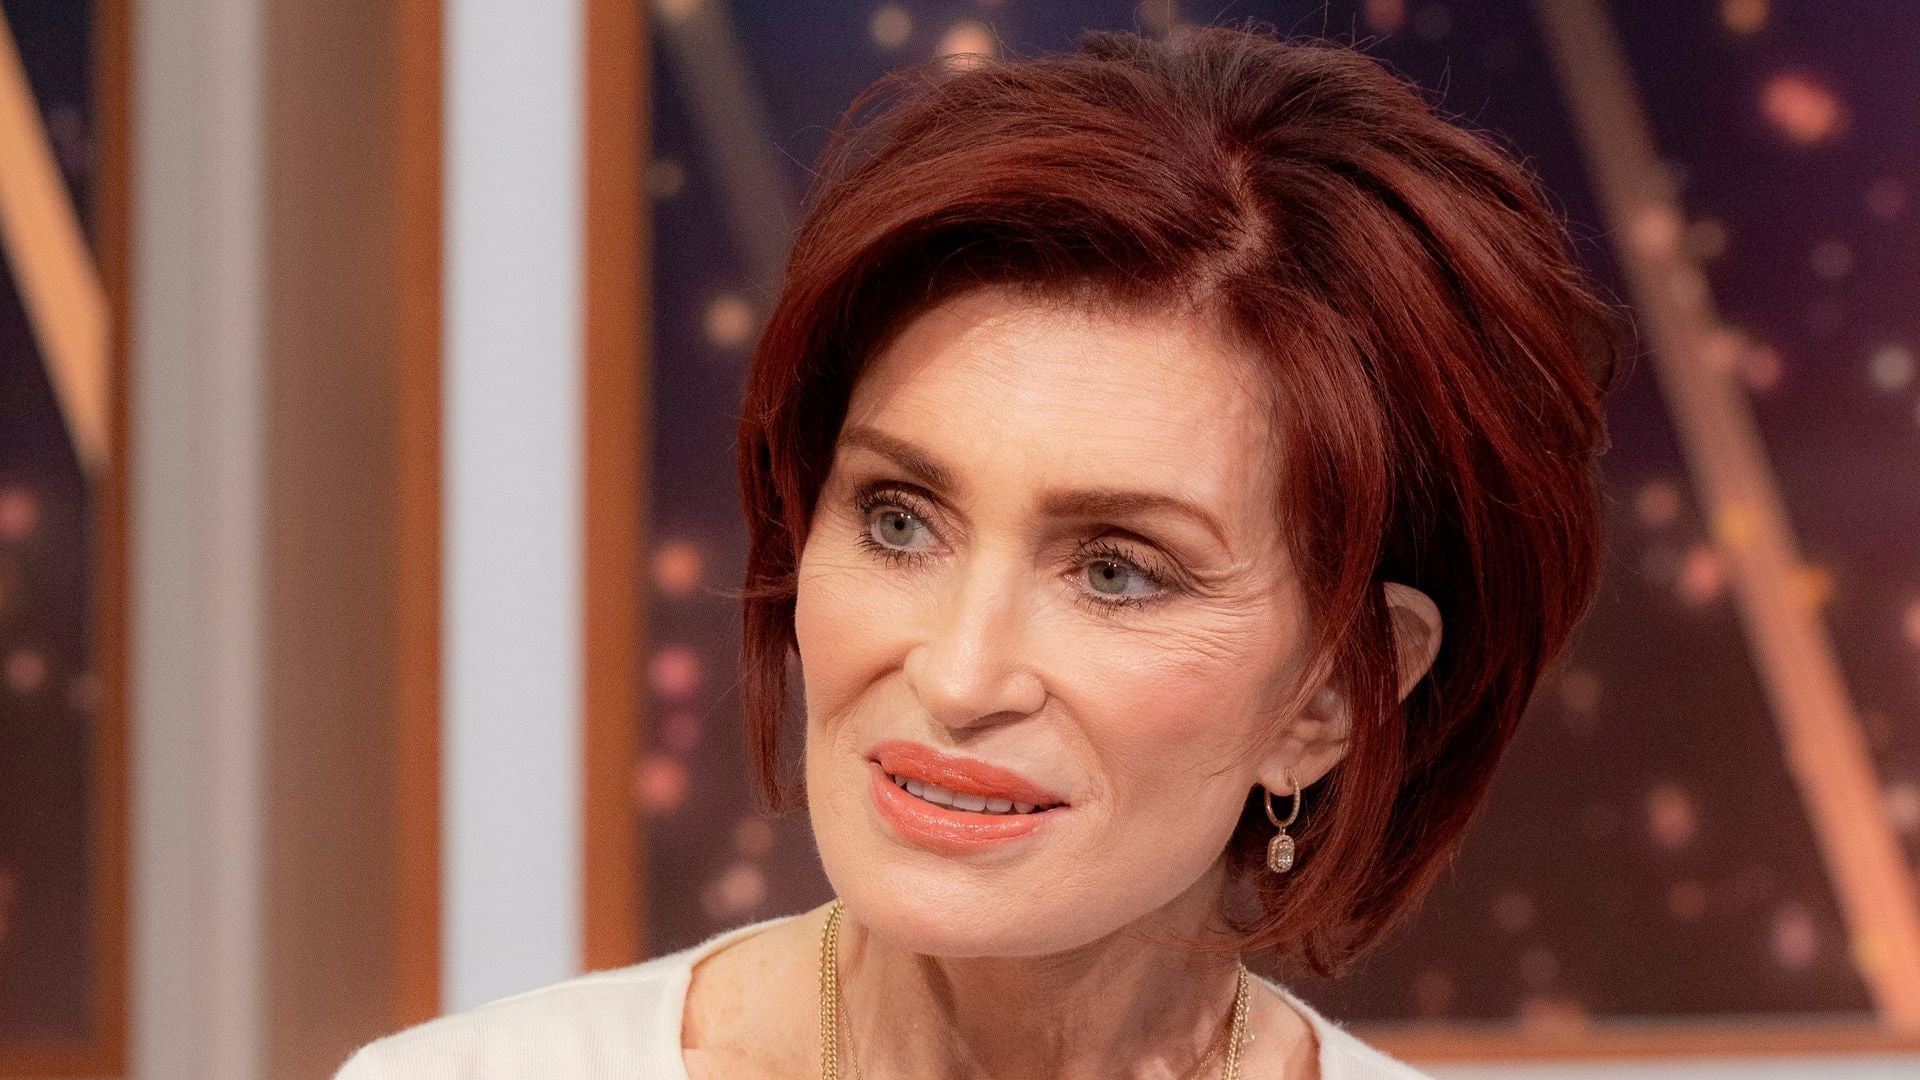 Sharon Osbourne in a white dress and gold necklace